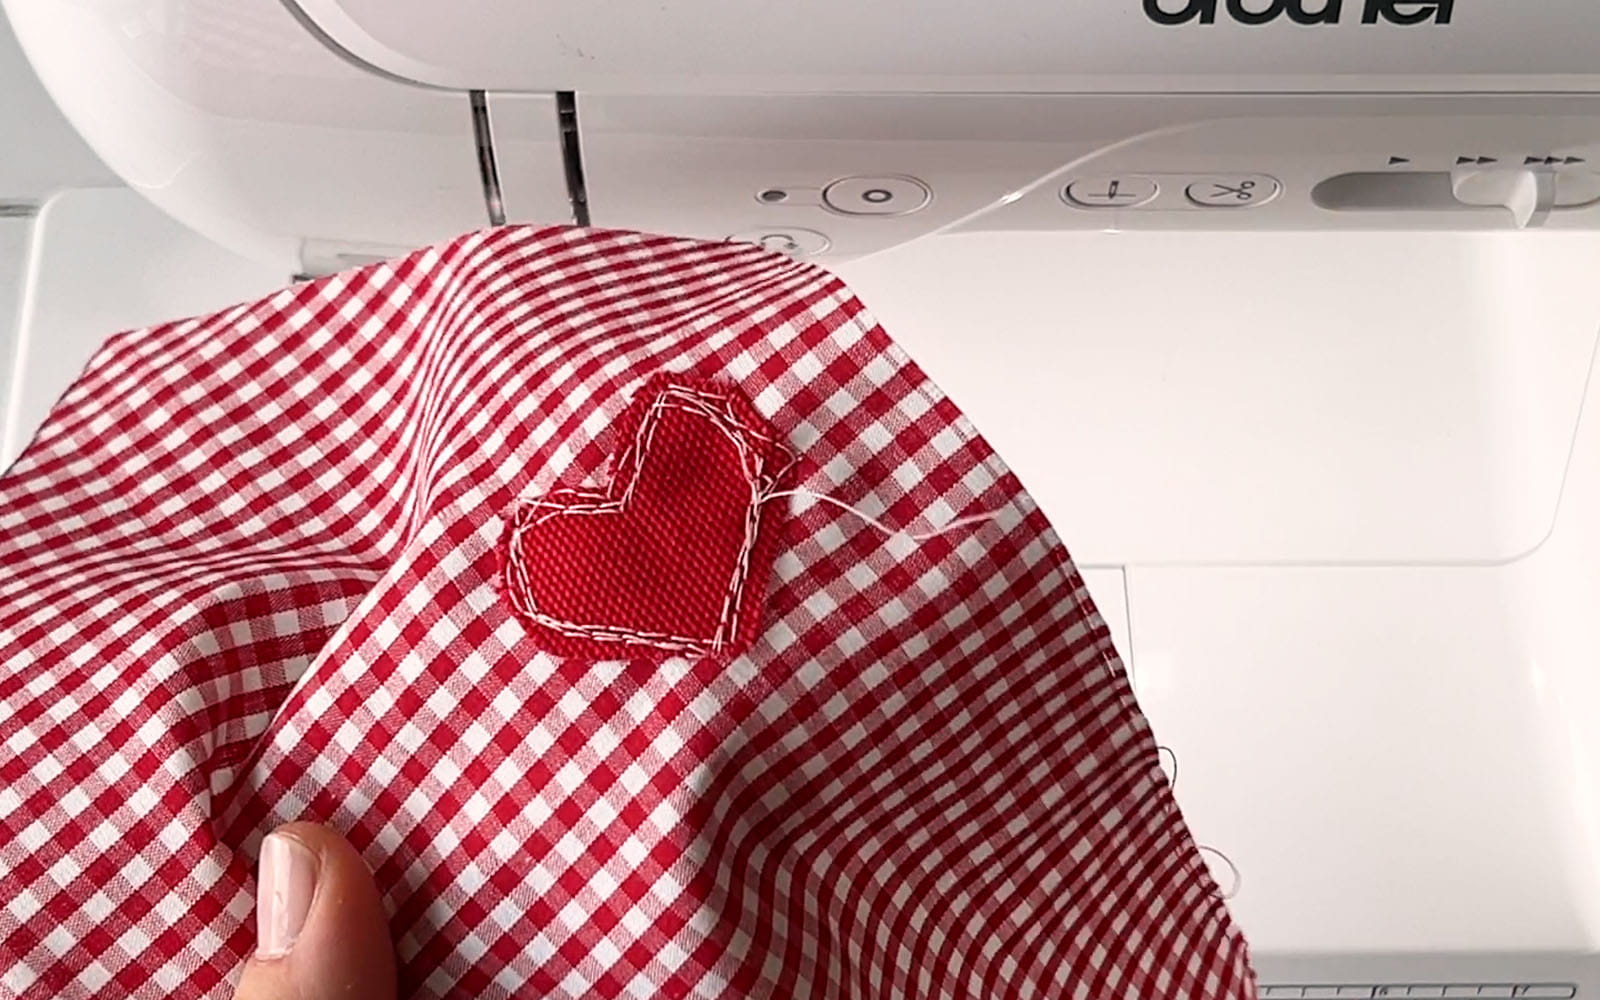 Red and white gingham with Brother sewing machine in background